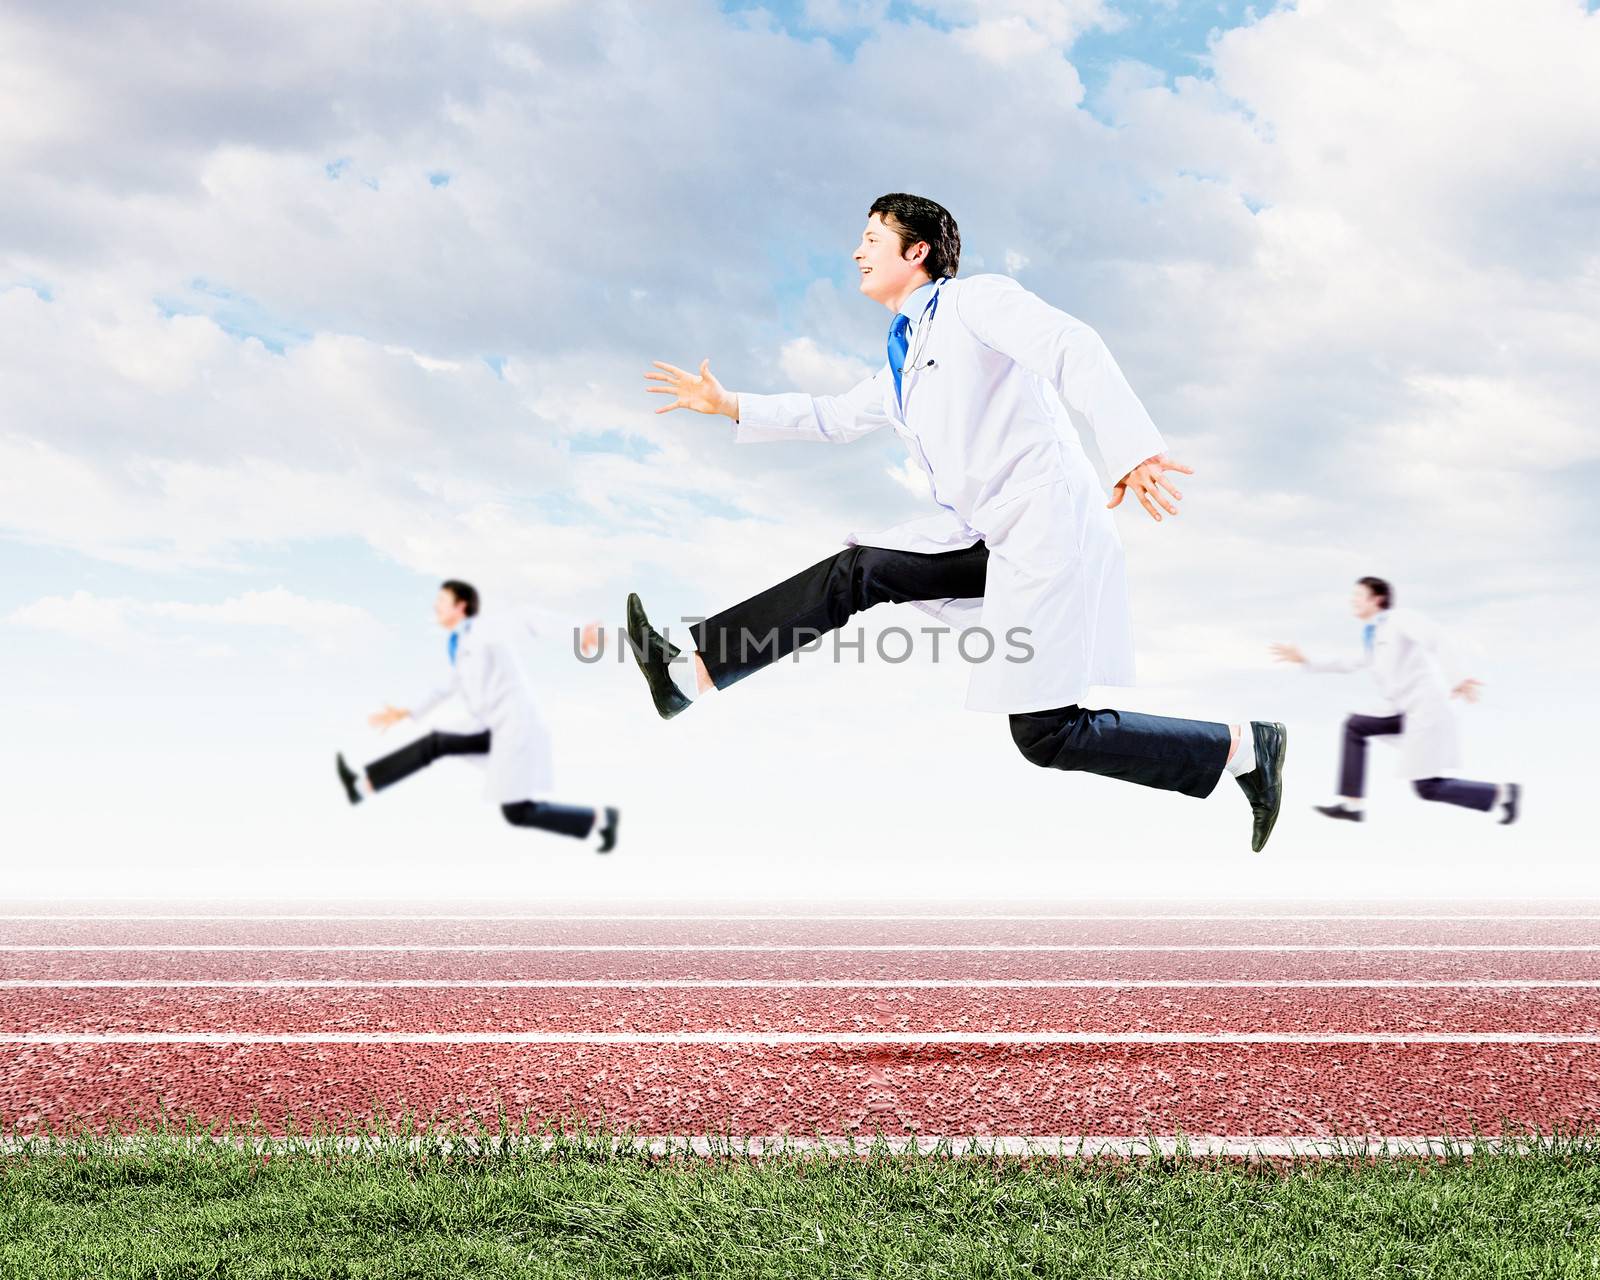 Running doctor by sergey_nivens